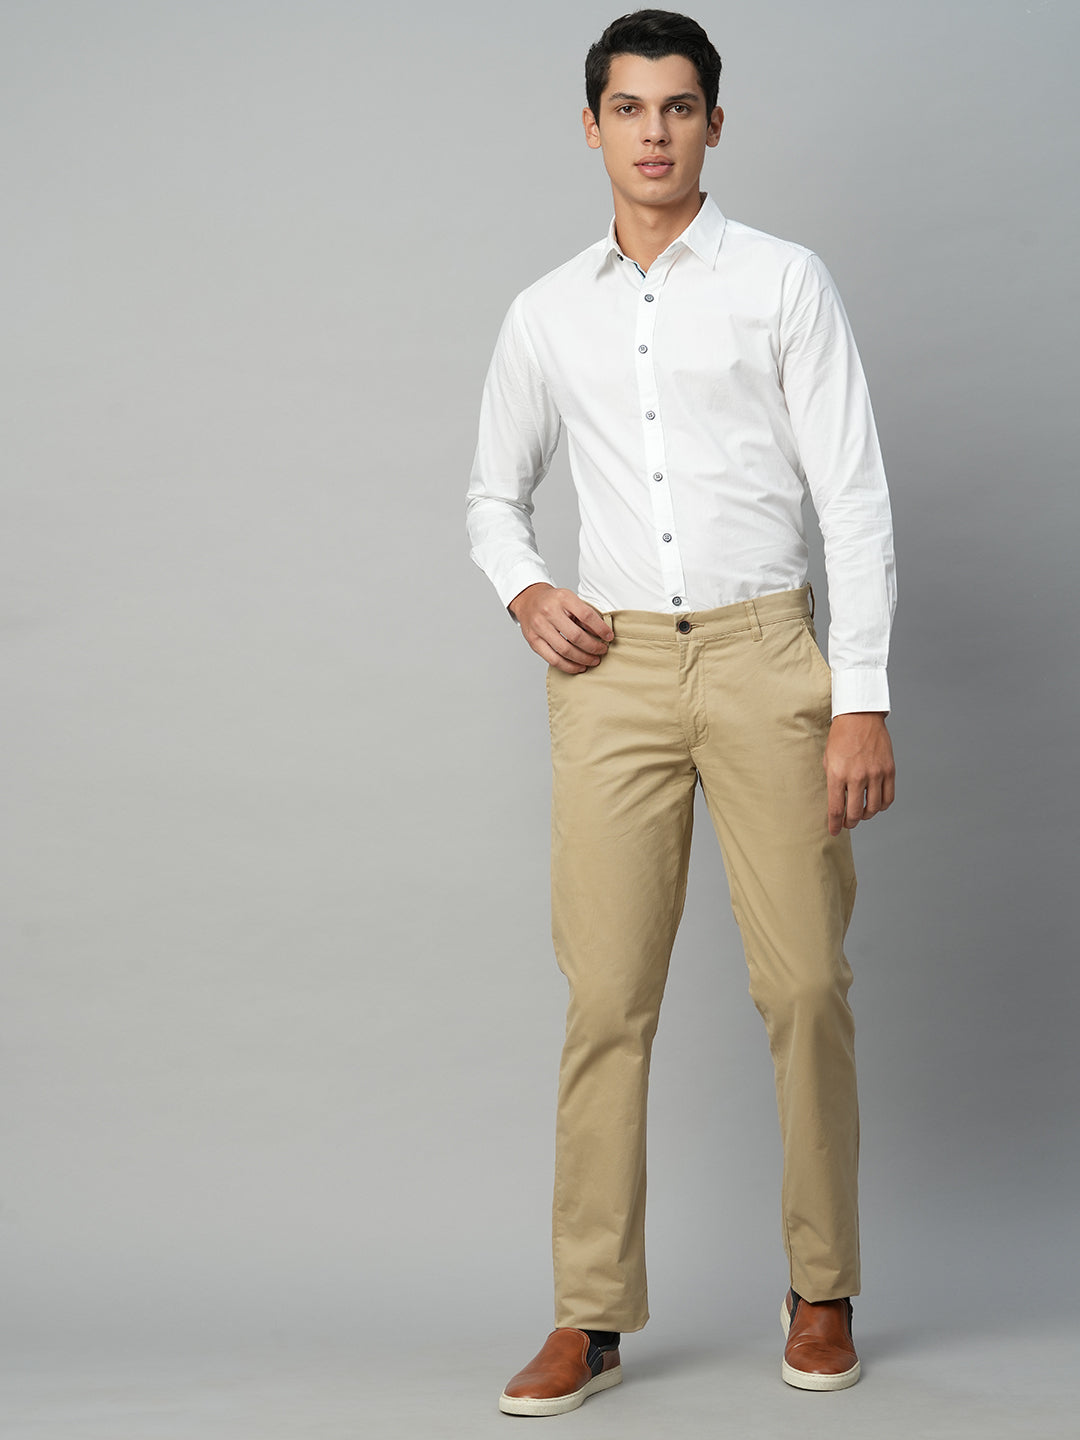 Beige Pants with White Shirt Casual Summer Outfits For Men In Their 20s 36  ideas  outfits  Lookastic